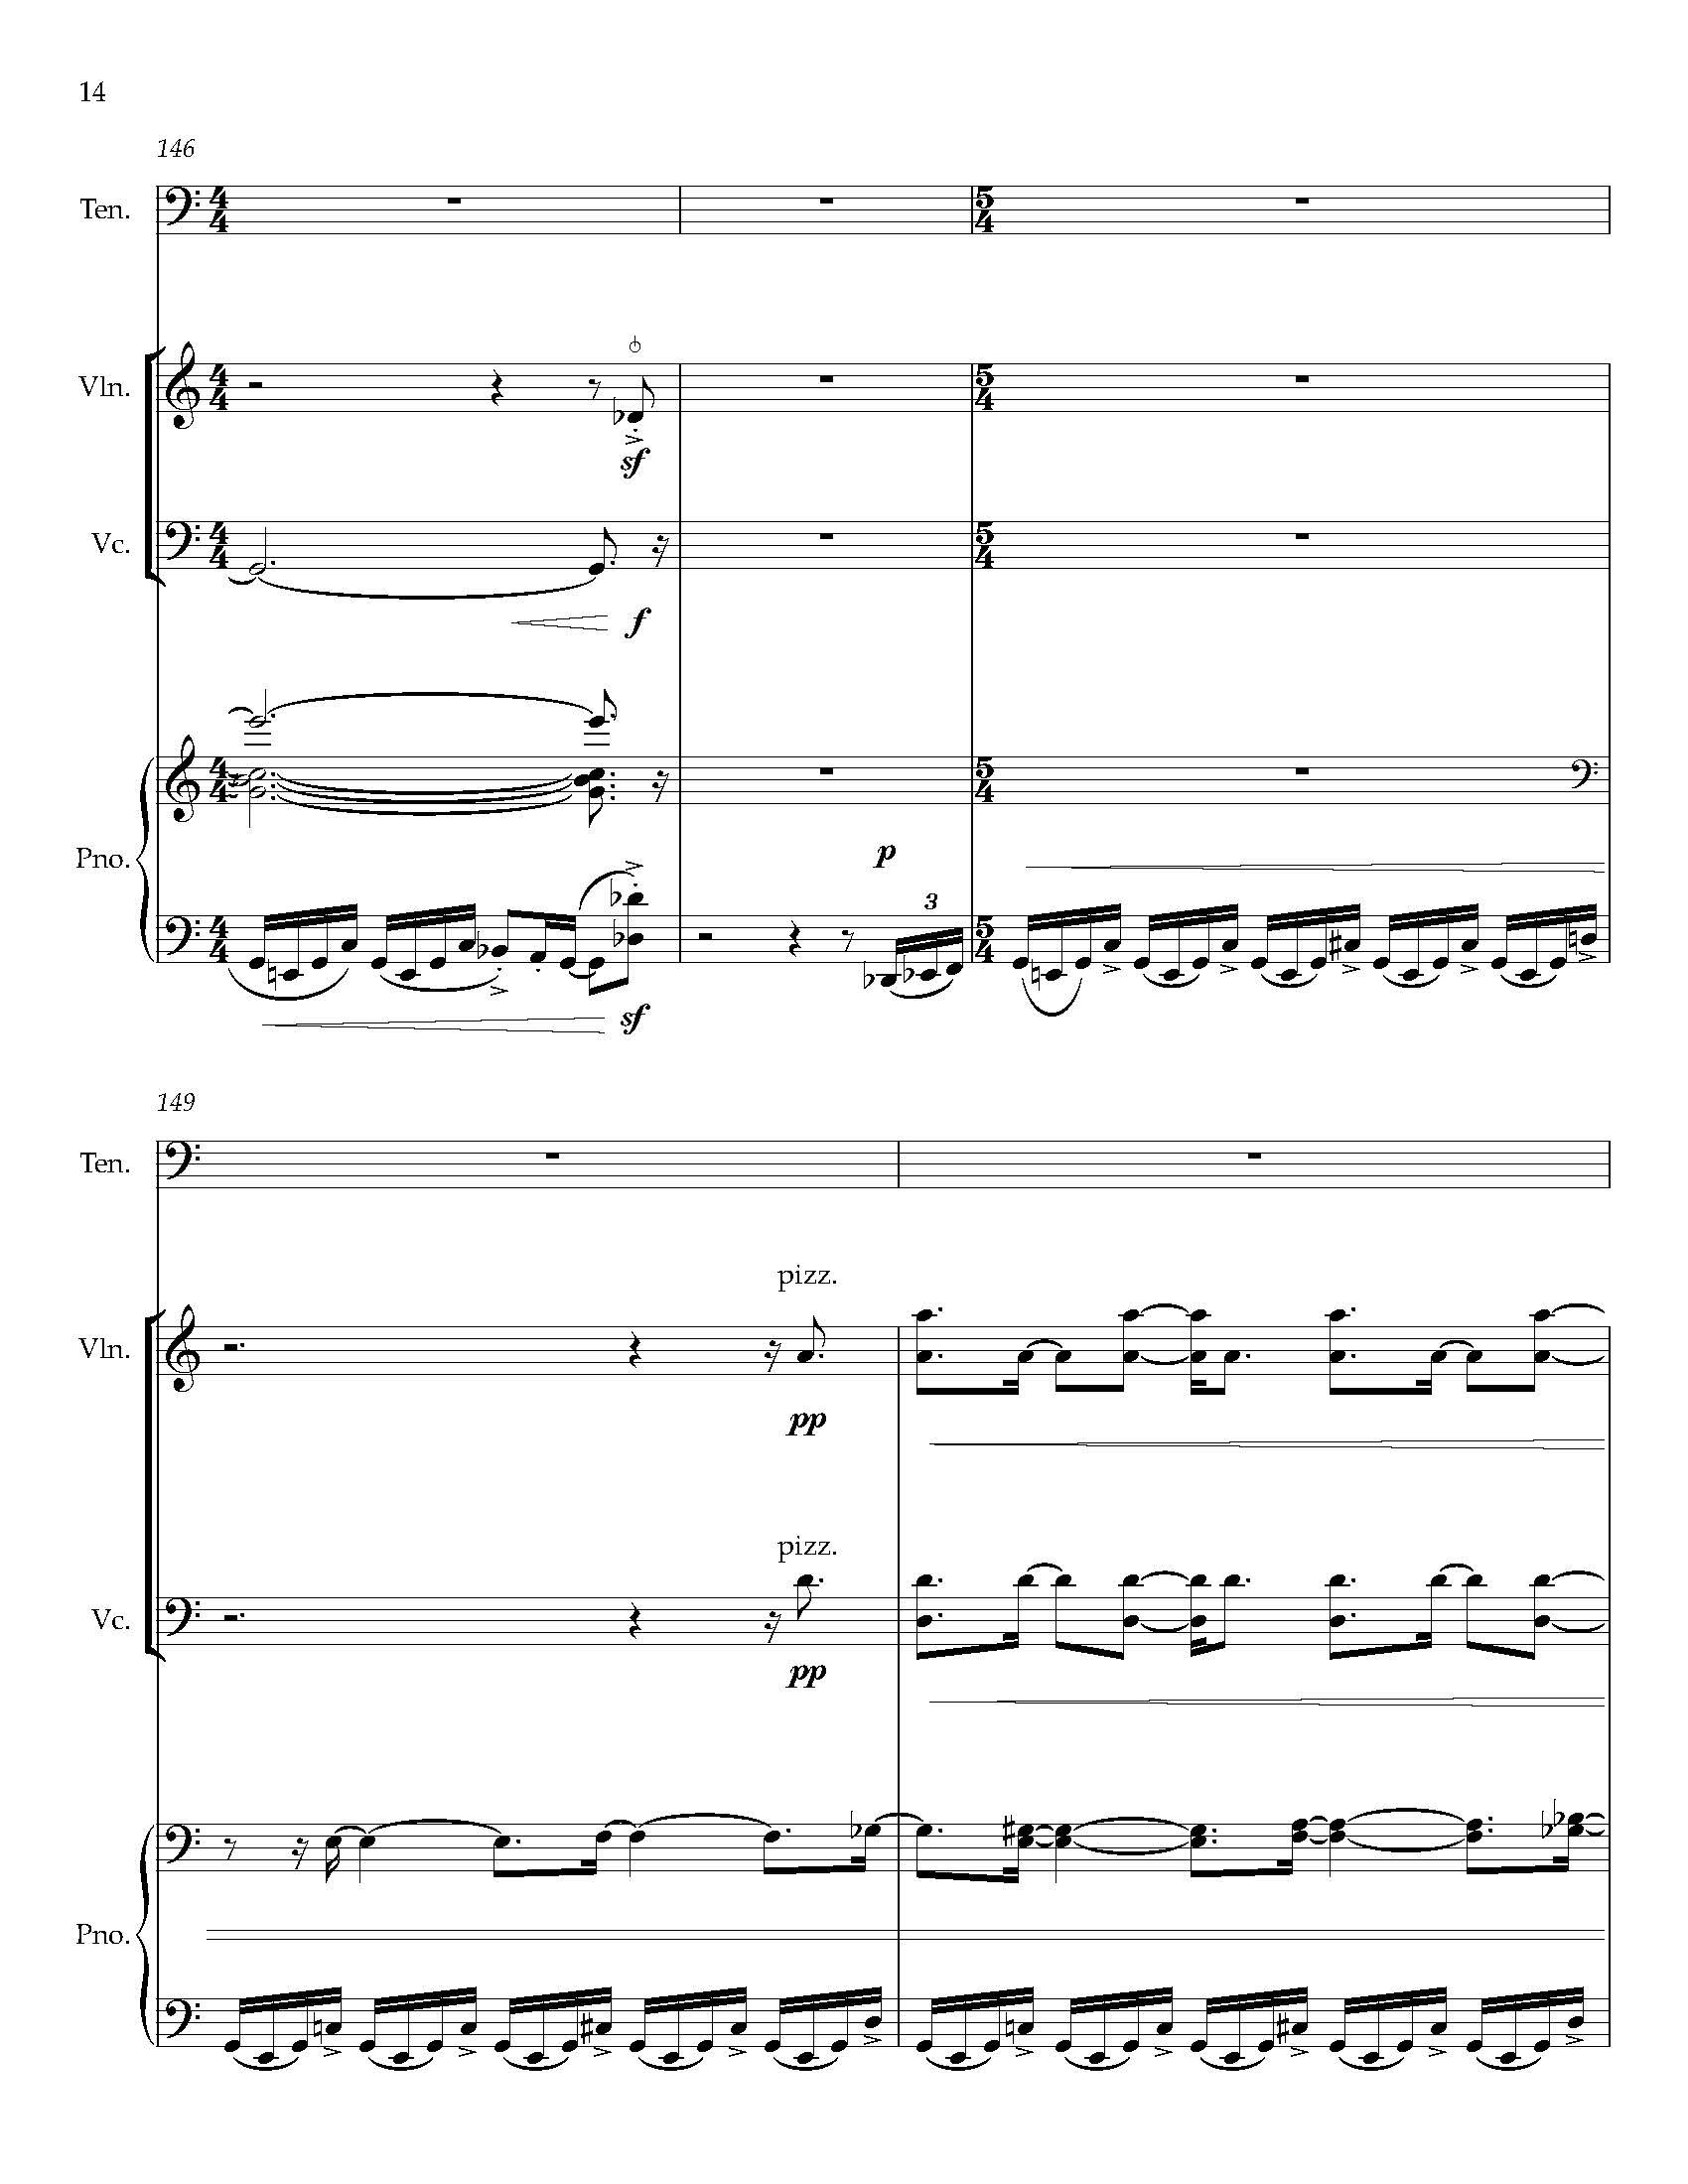 Gursky Songs - Complete Score_Page_22.jpg